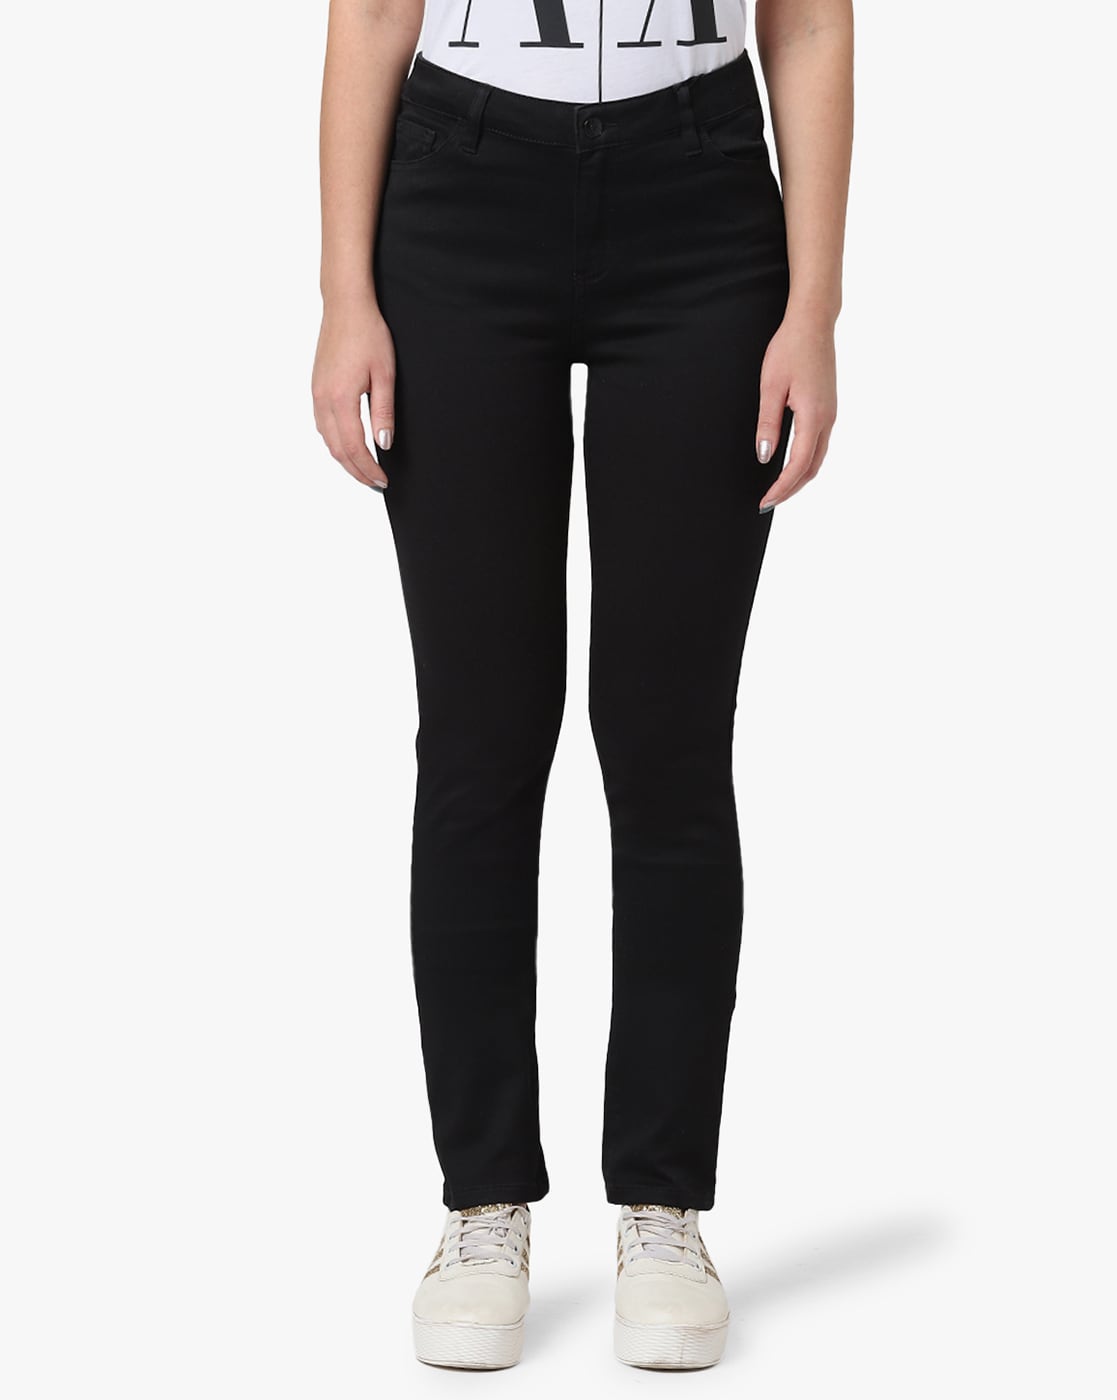 Buy LIFE WITH POCKETS Black High Rise Denim Relaxed Fit Women's Jeans |  Shoppers Stop